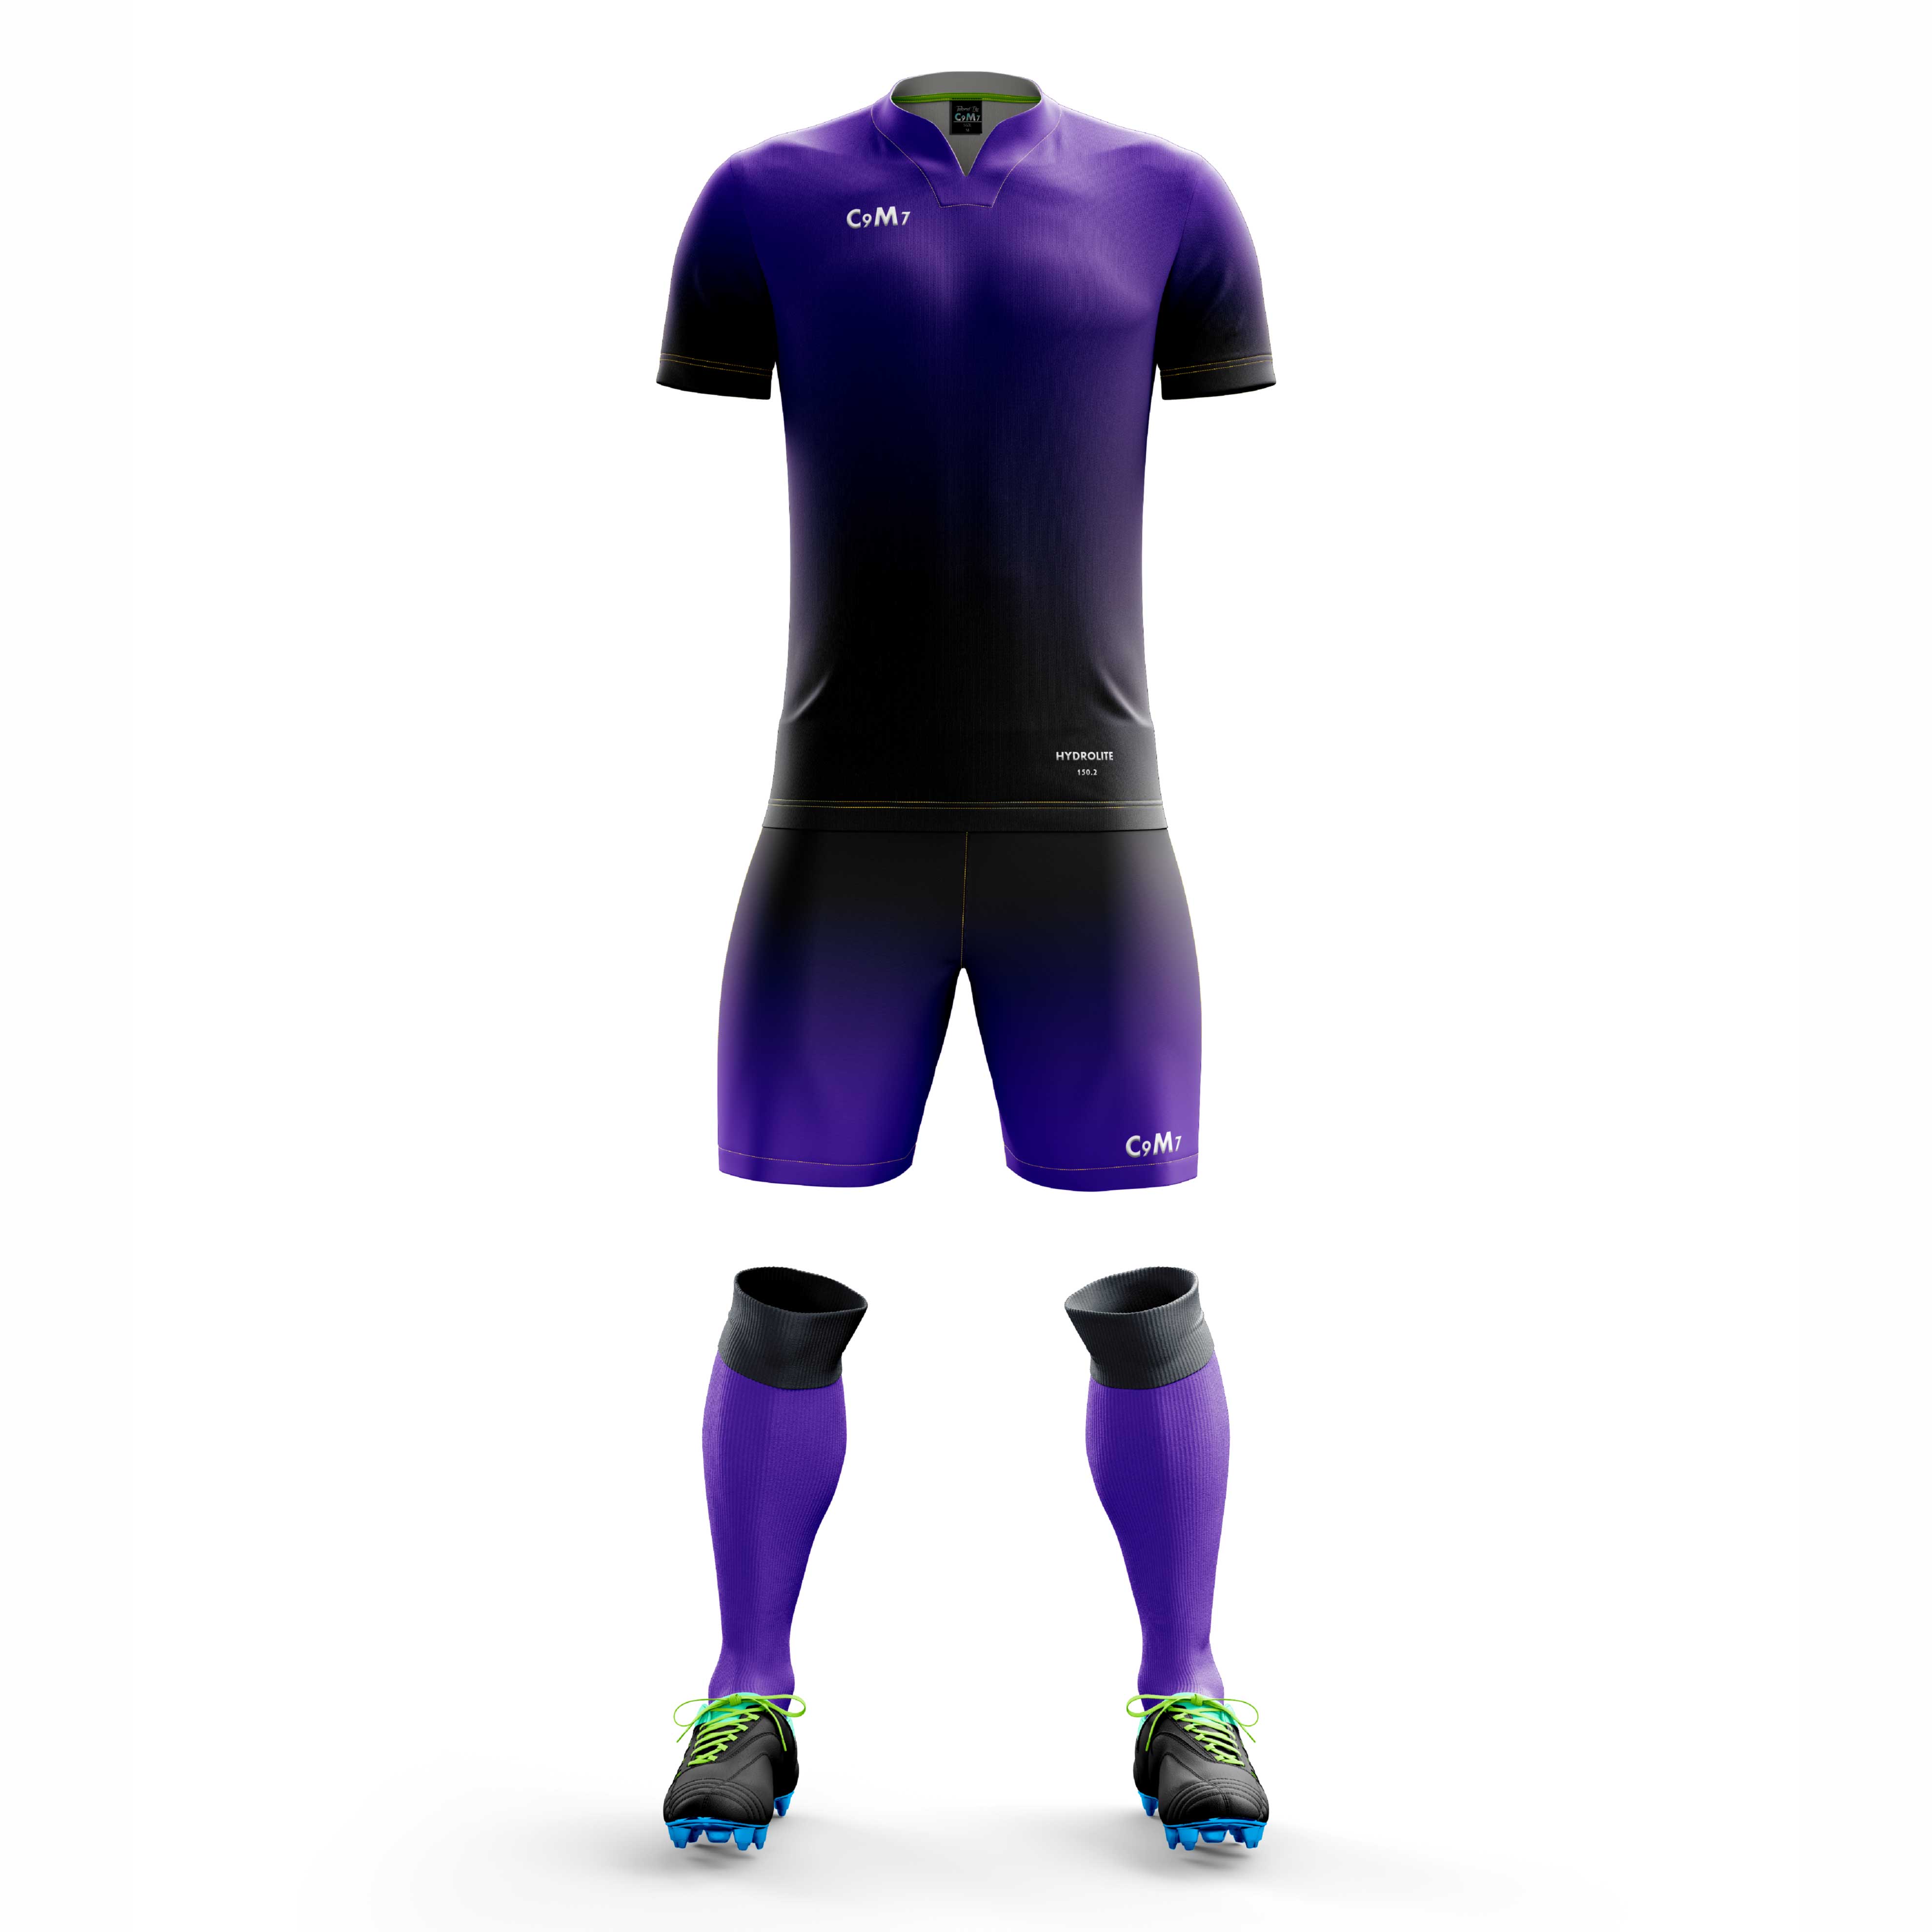 Adults Football Team Kits - The Elastico , MADE IN ANY COLOUR $84.90